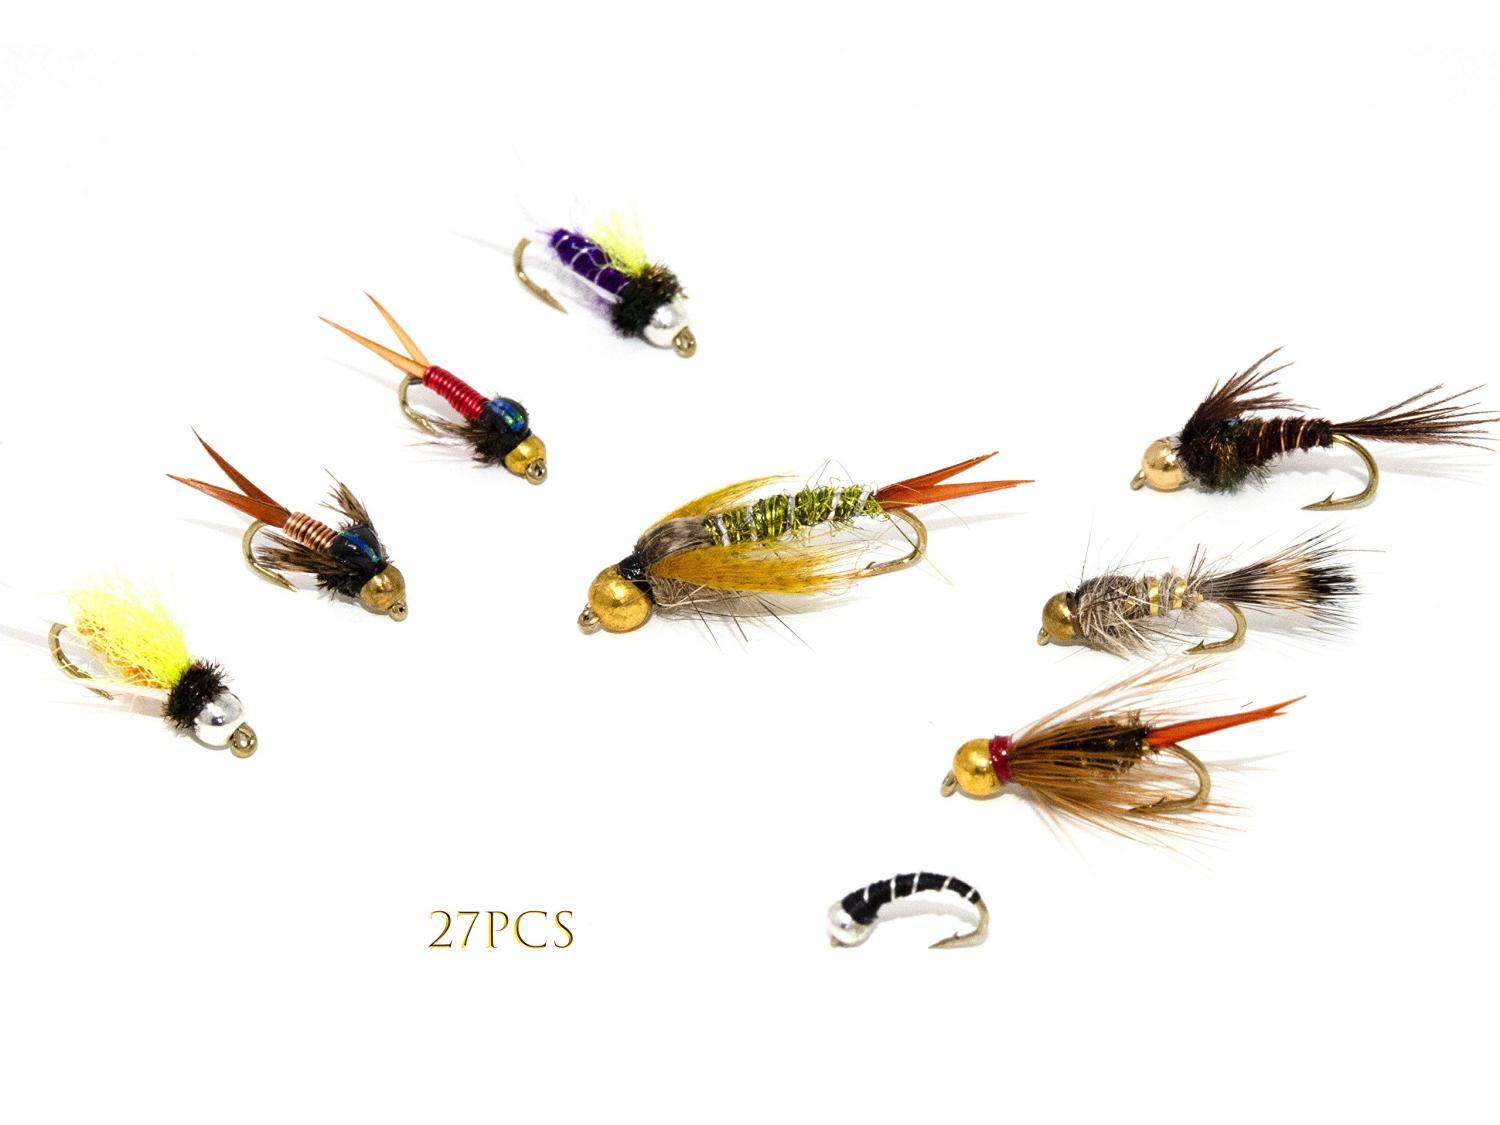 Outdoor Planet Favorite Fly Fishing Flies Assortment, Dry, Wet, Nymphs,  Streamers, Wooly Buggers, Hopper, Caddis